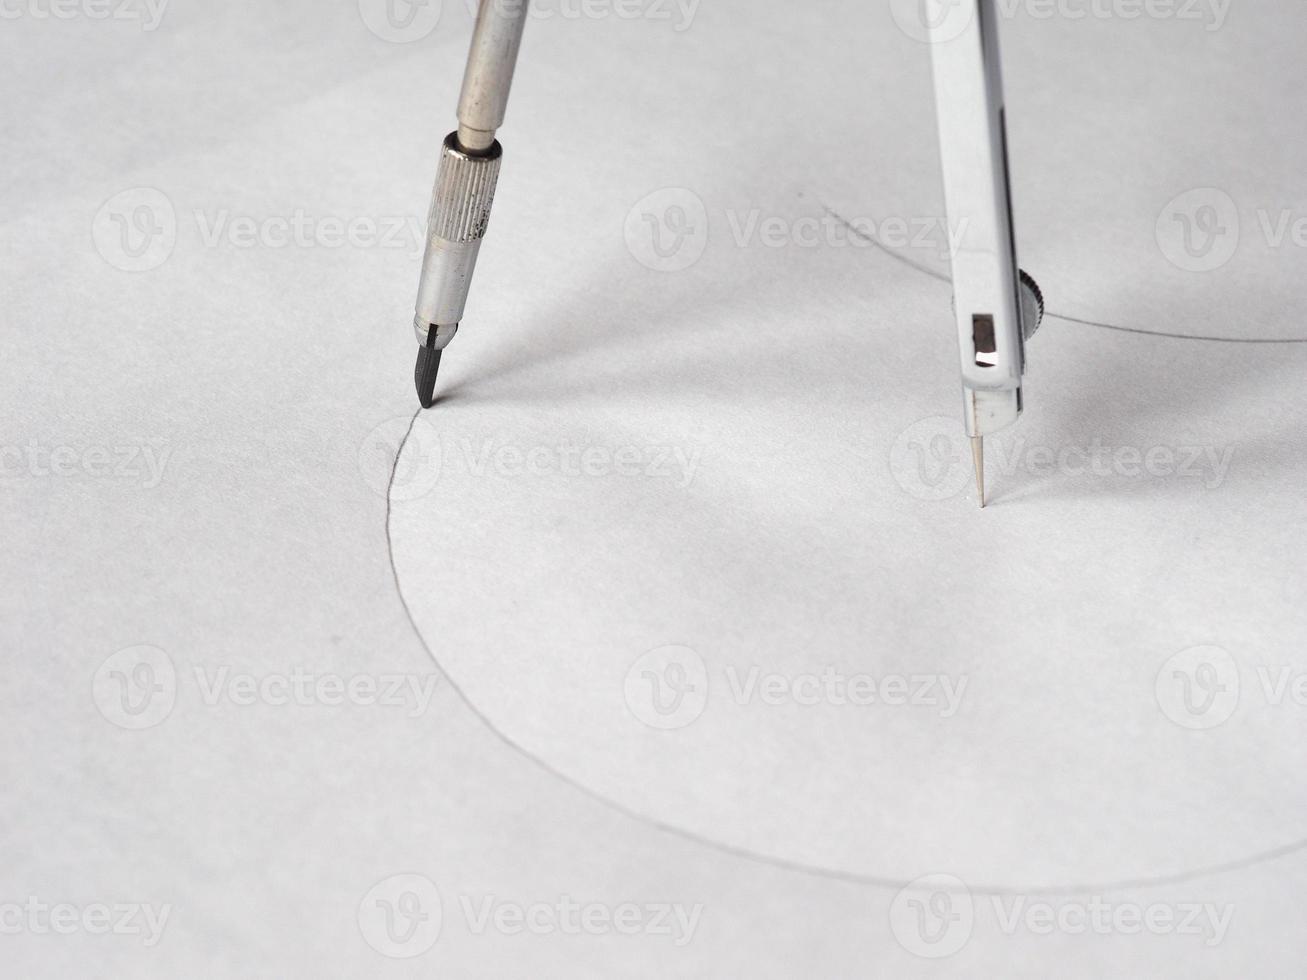 Compass drawing tool photo